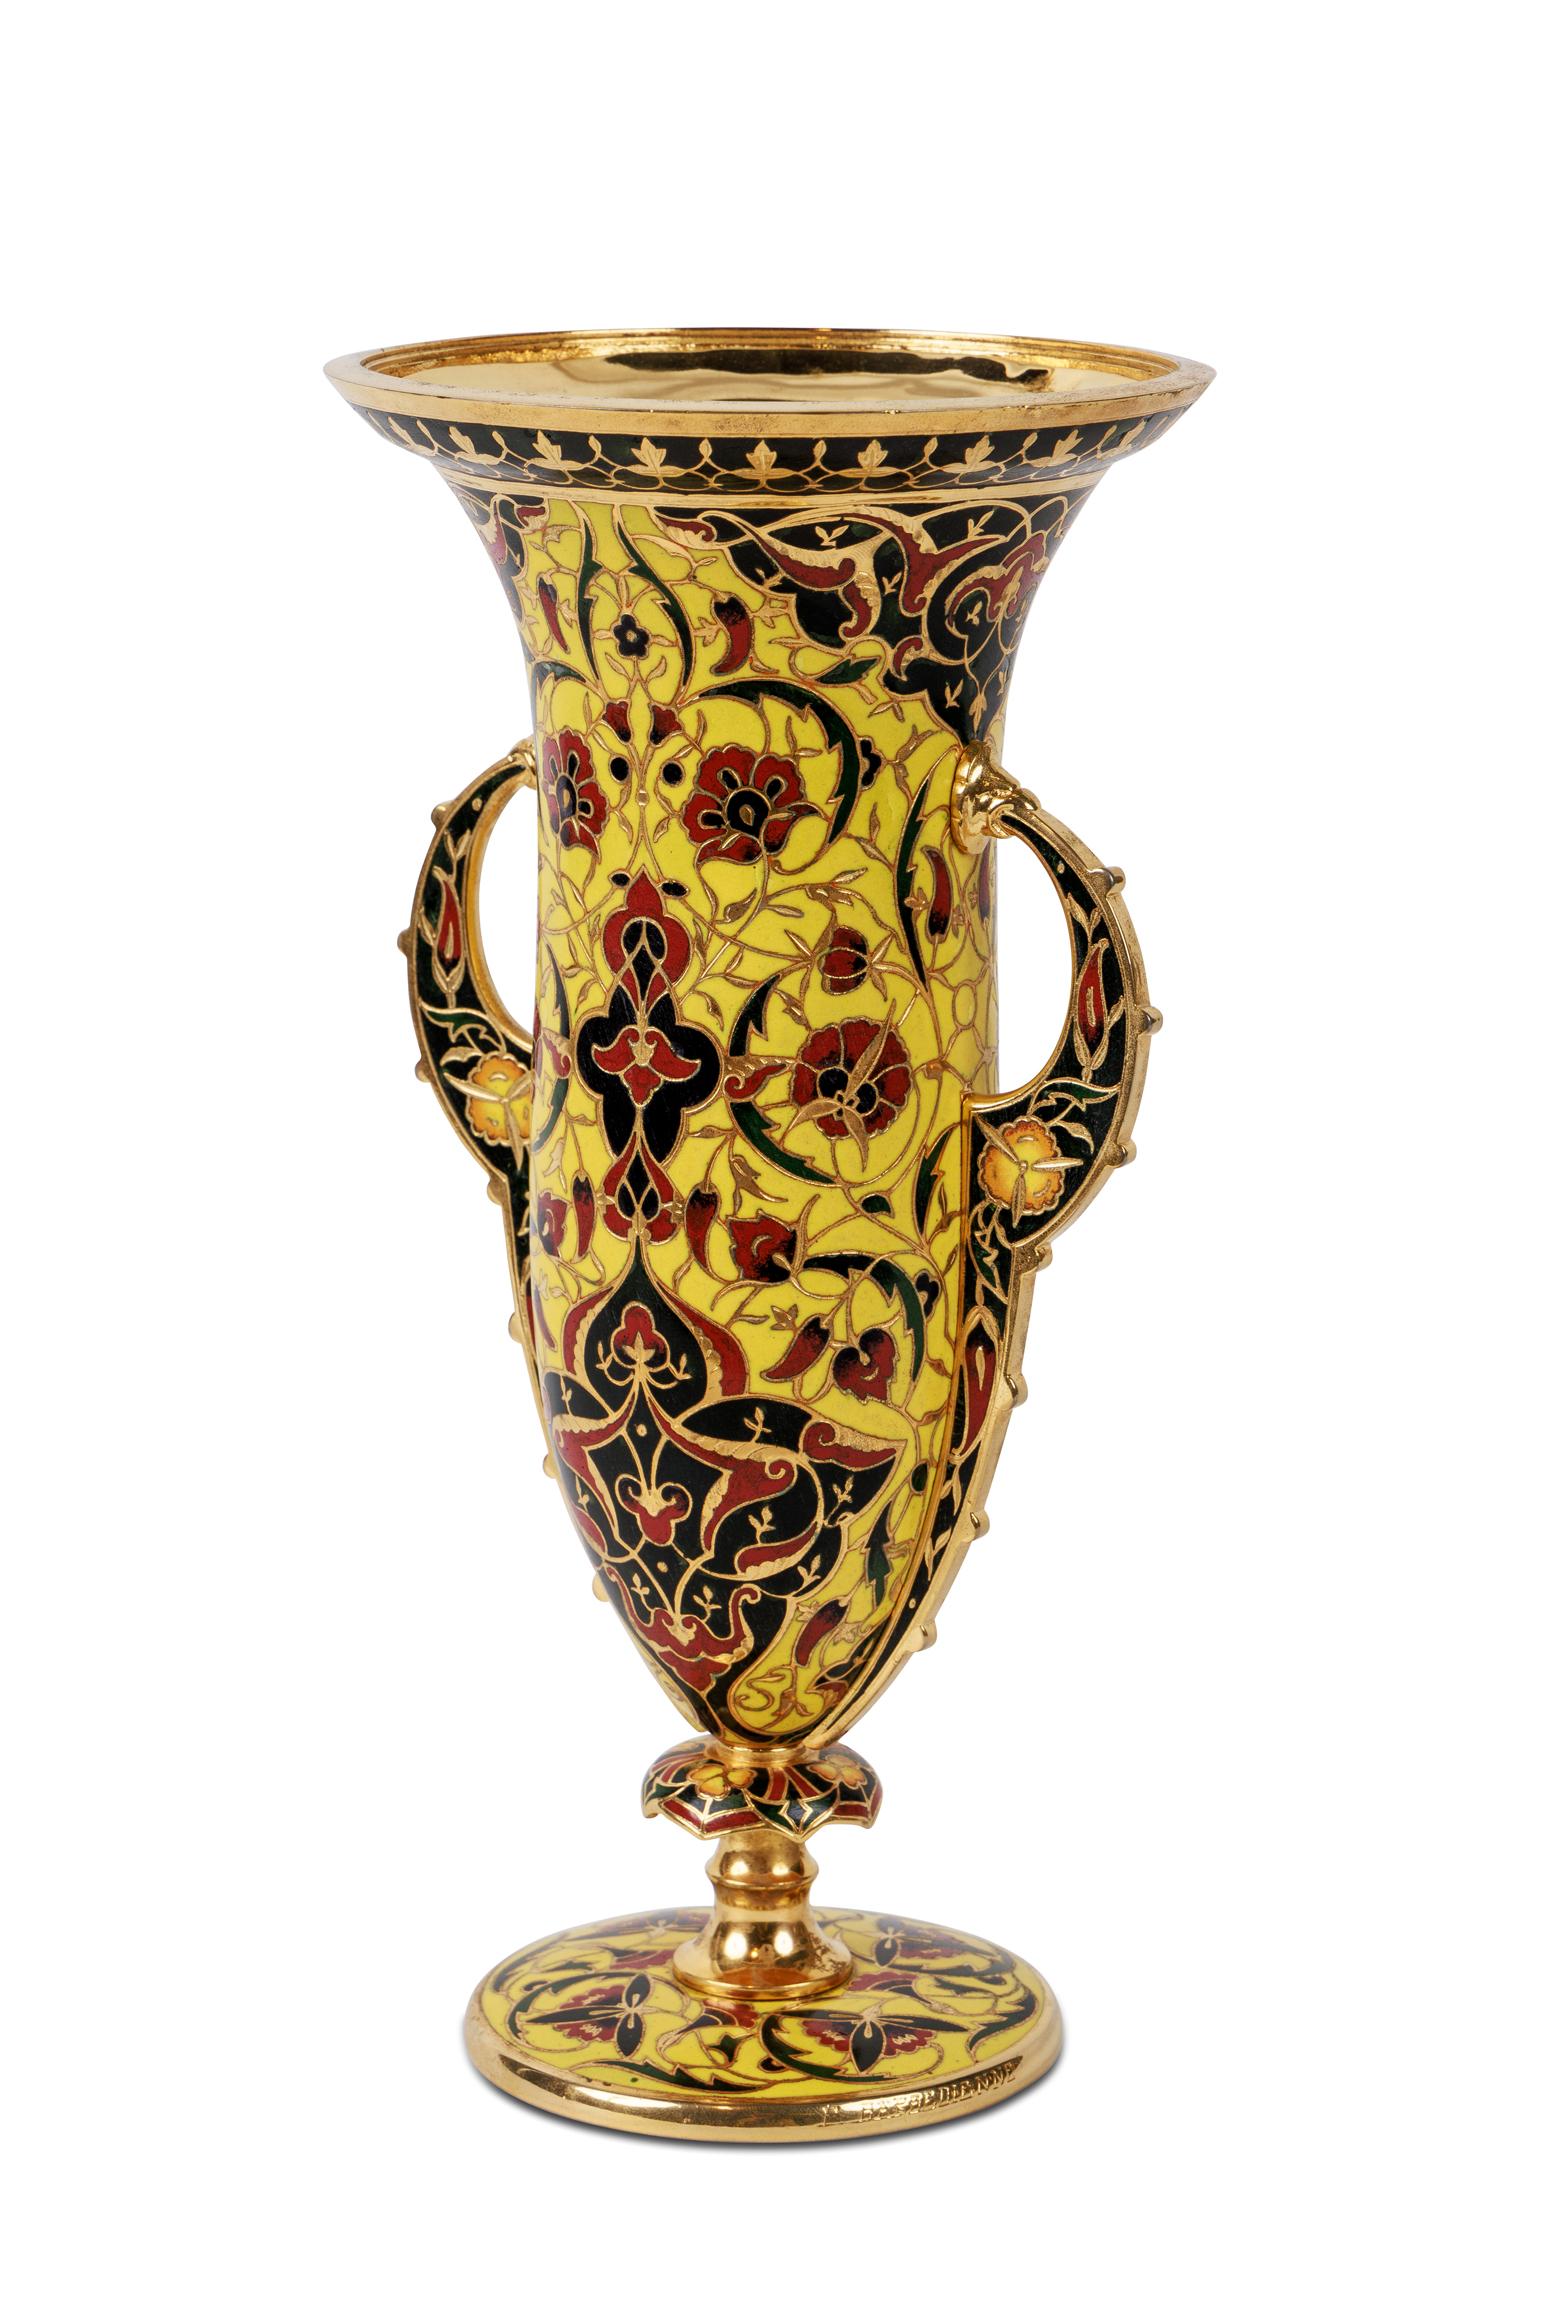 Ferdinand Barbedienne, A French Ormolu and Champleve Enamel Vase, C. 1870 For Sale 1